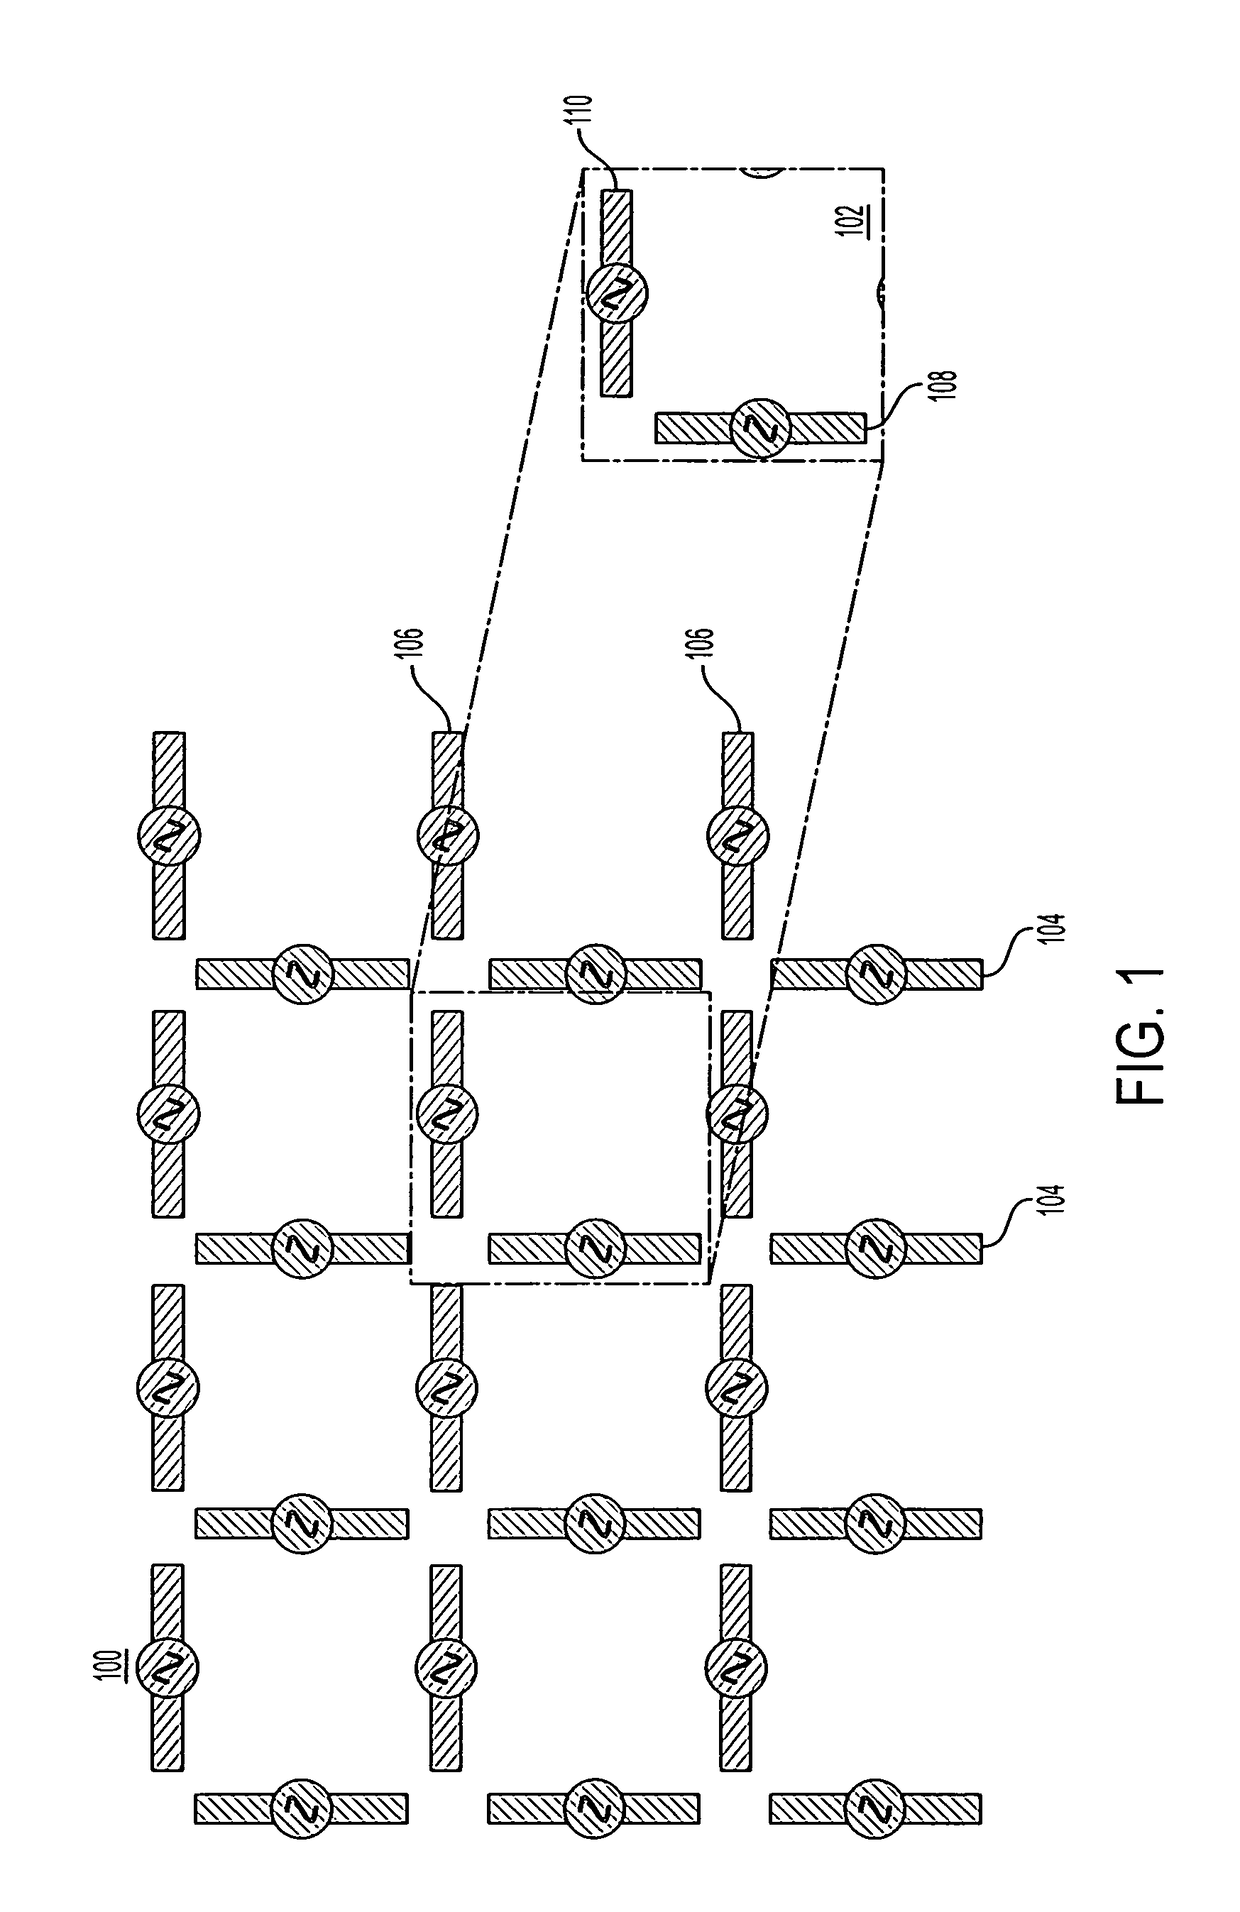 Substrate-loaded frequency-scaled ultra-wide spectrum element